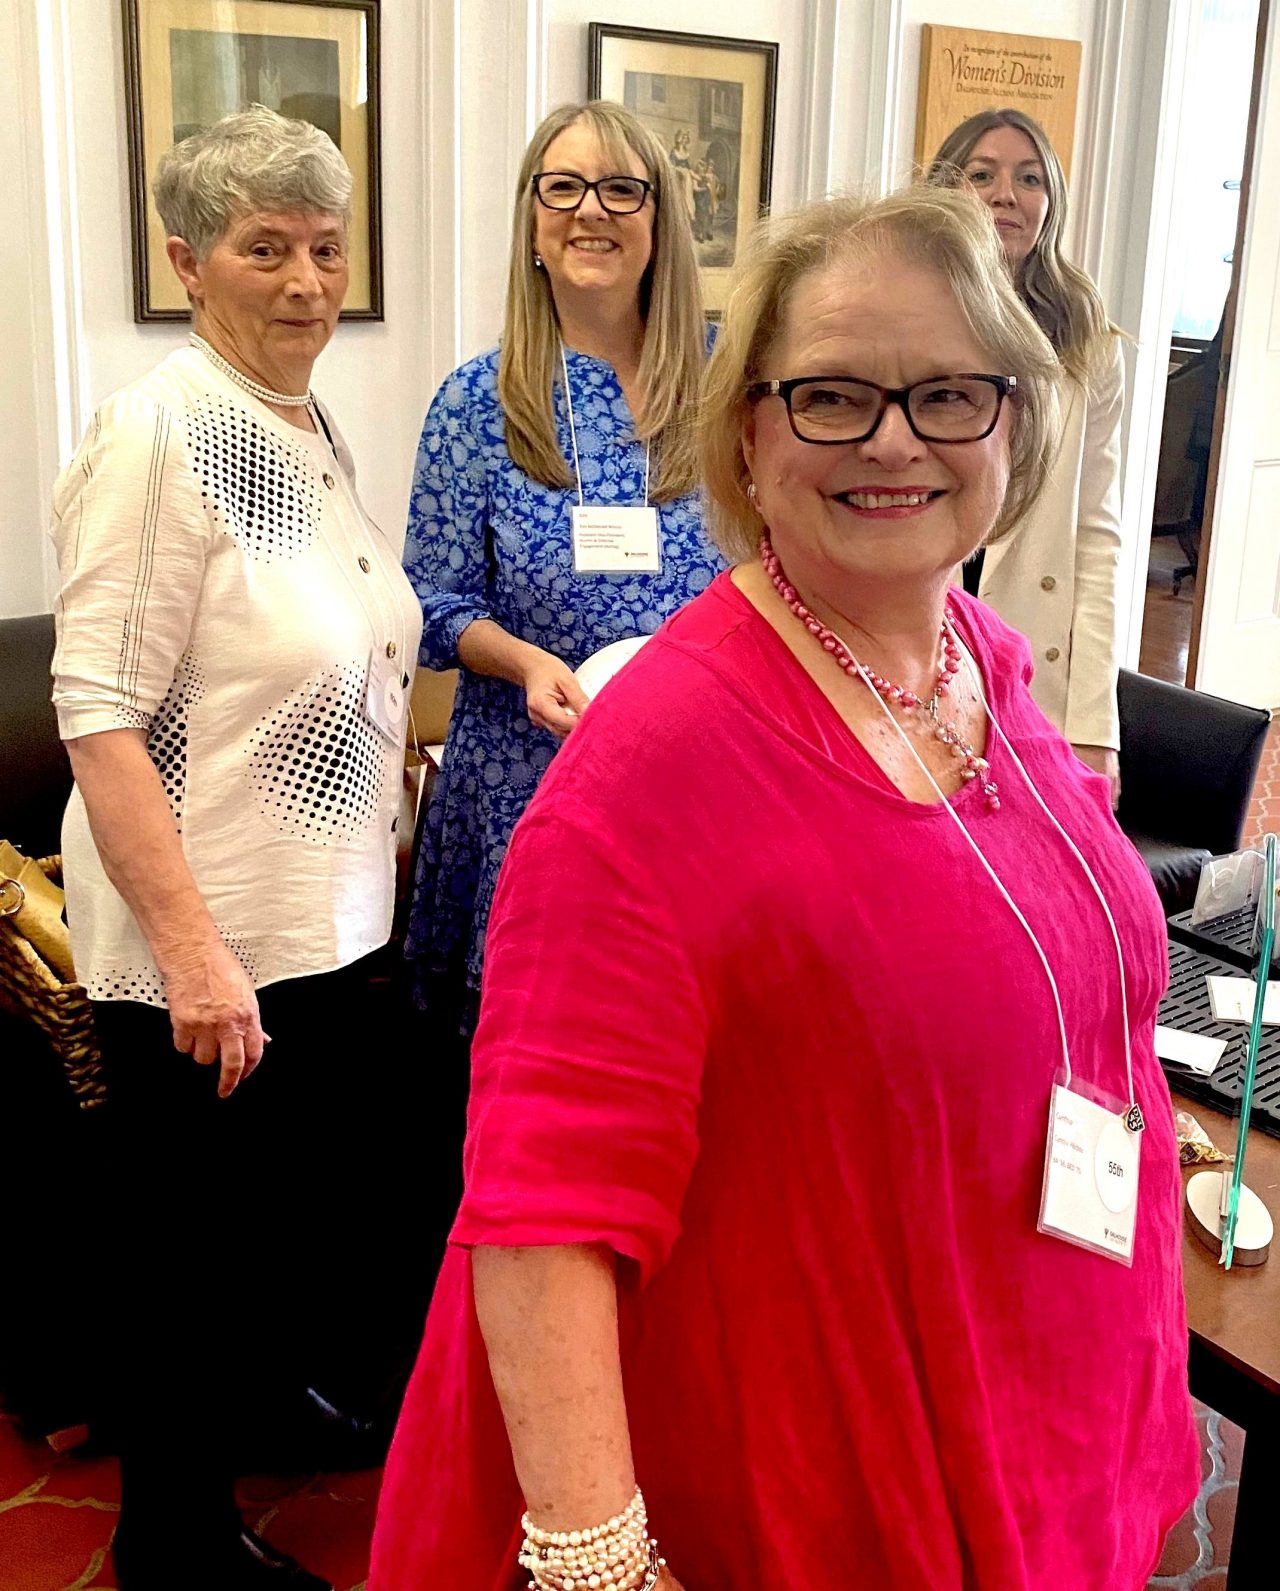 Cynthia Pilichos looks beyond the camera, smiling while three other women smile in the background at the reception area of an event.